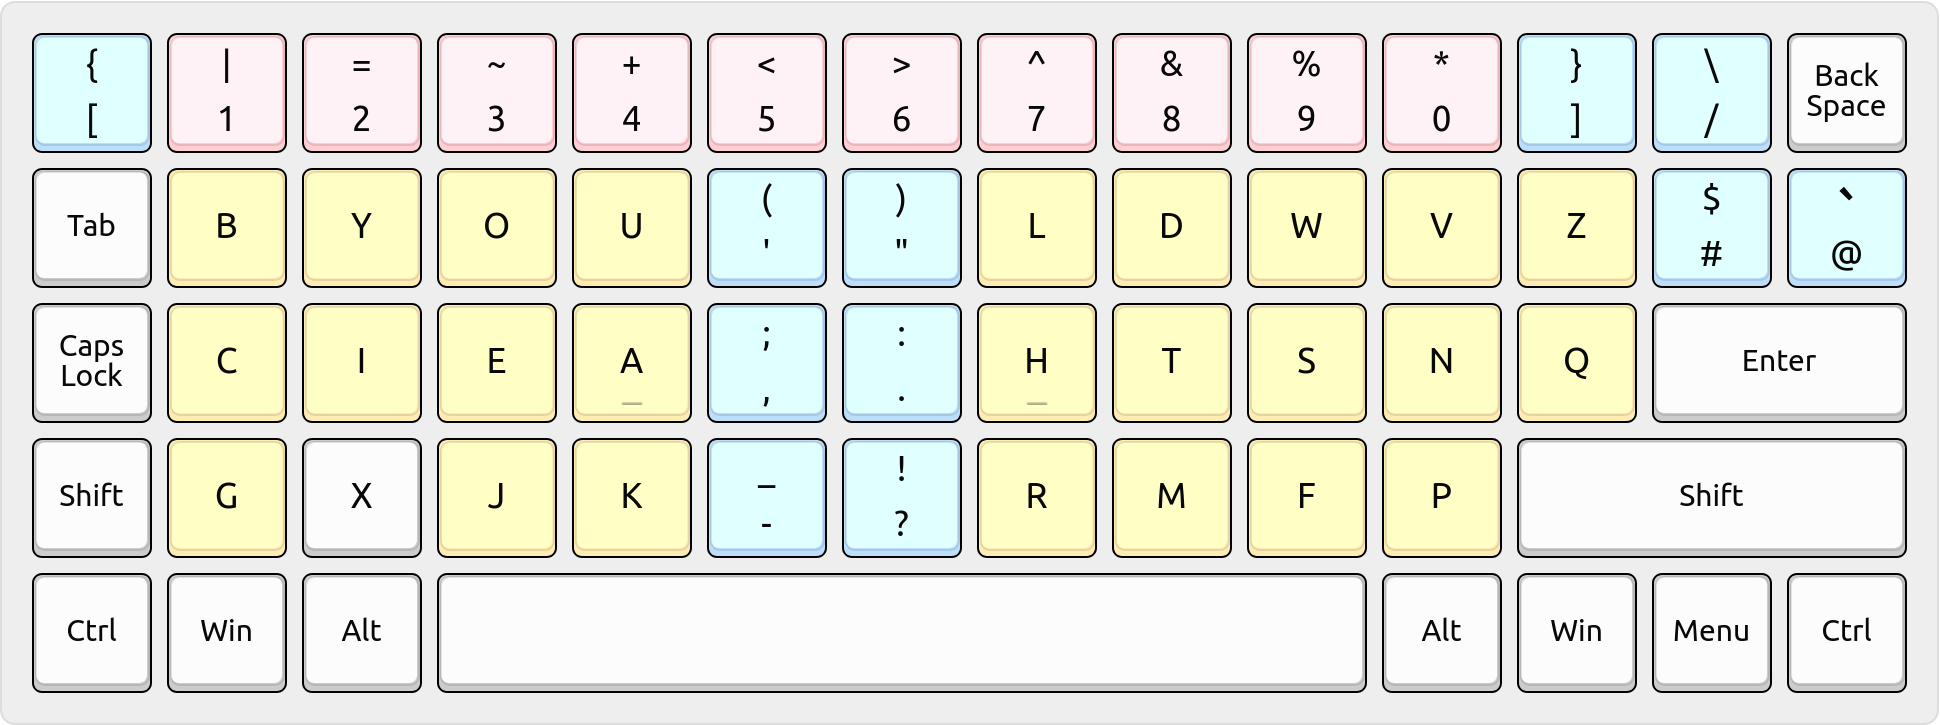 Rendering of this layout on an ortholinear keyboard.